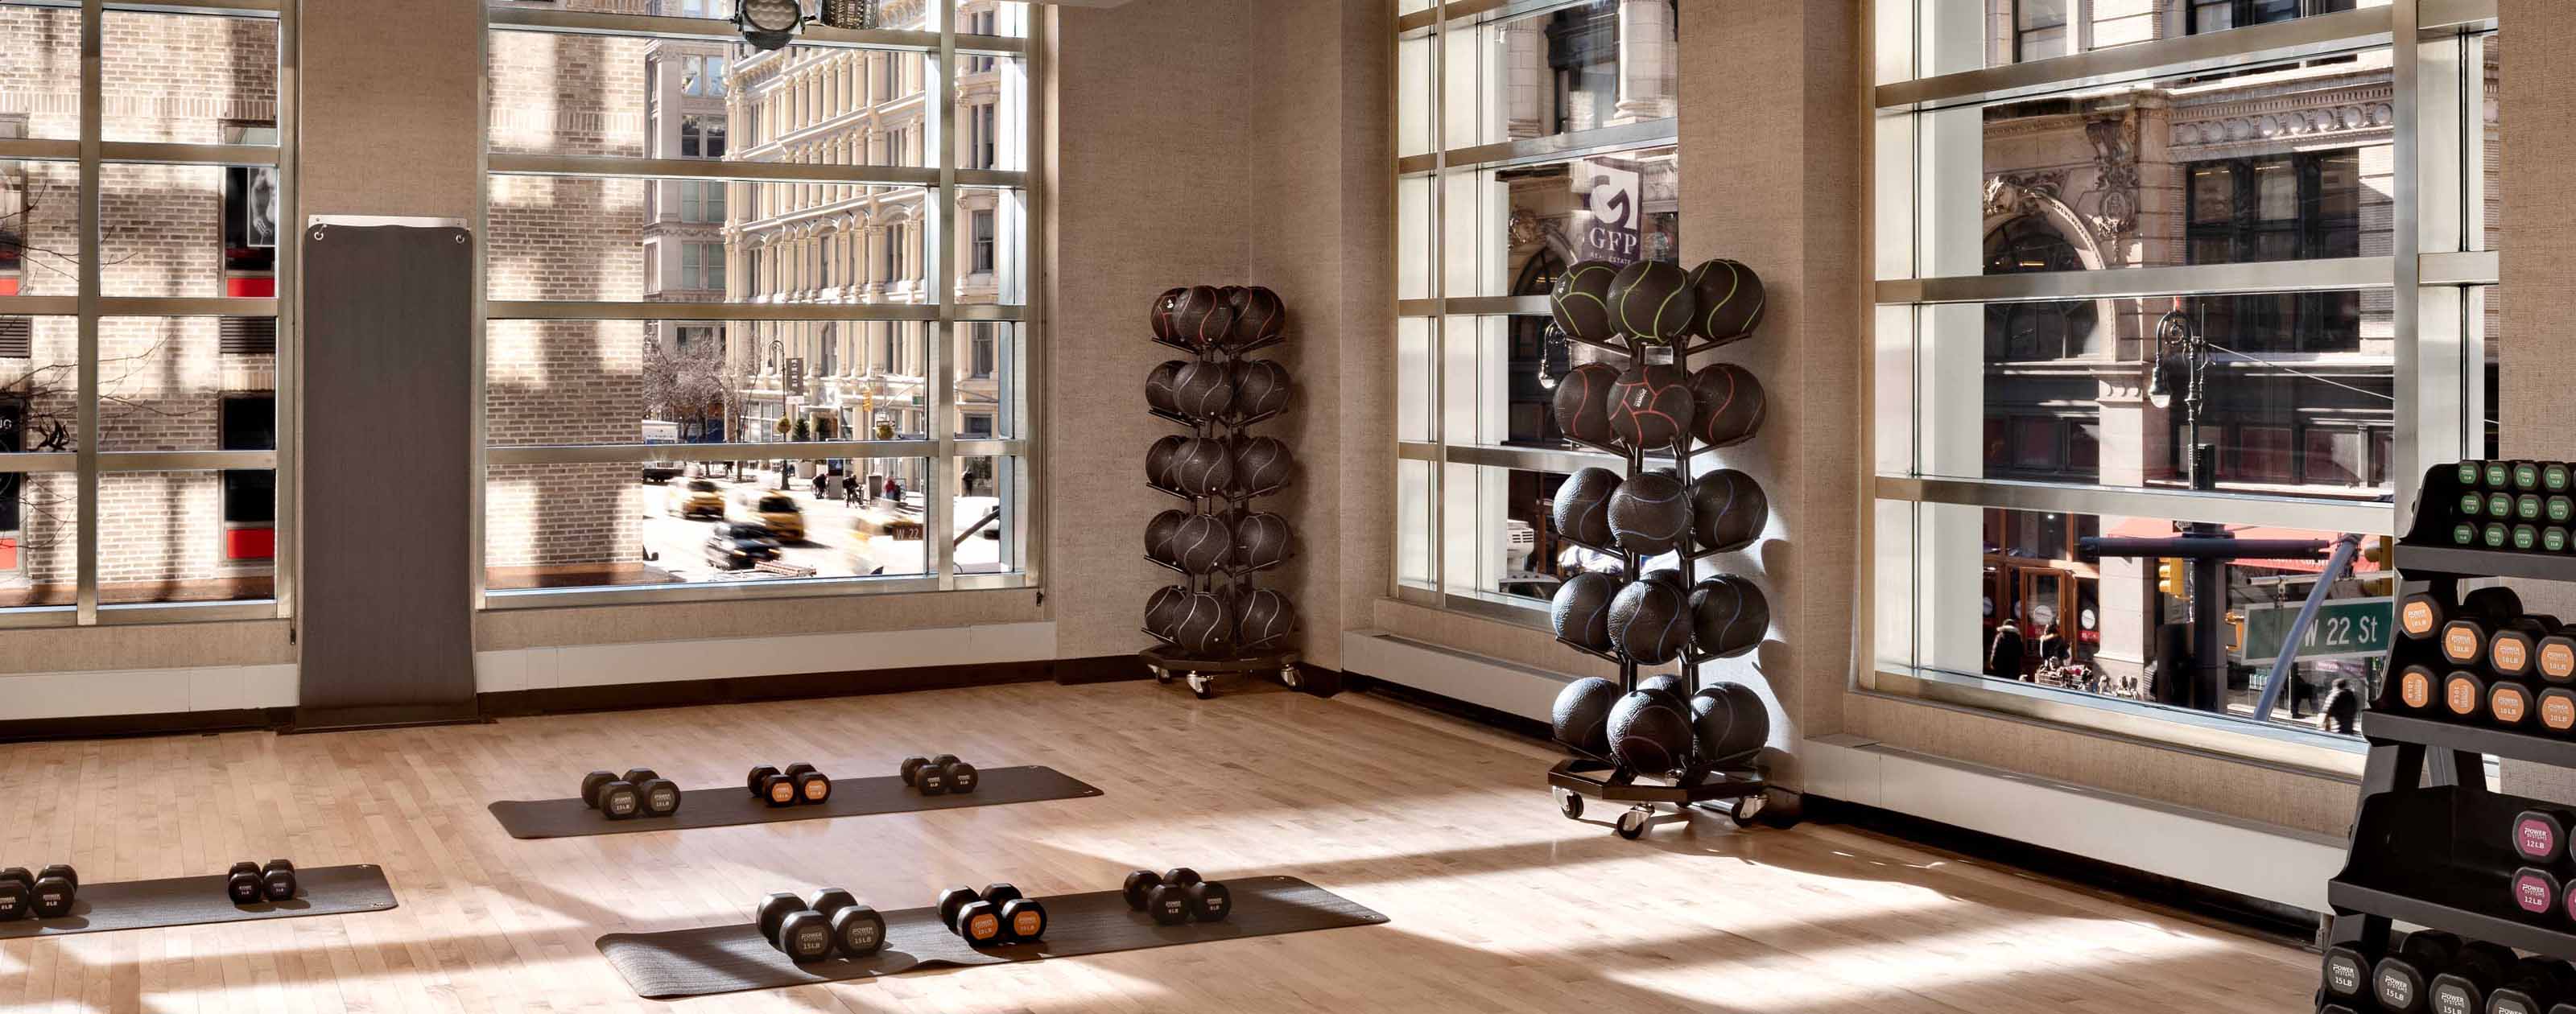 dumbells and medicine balls in a workout area